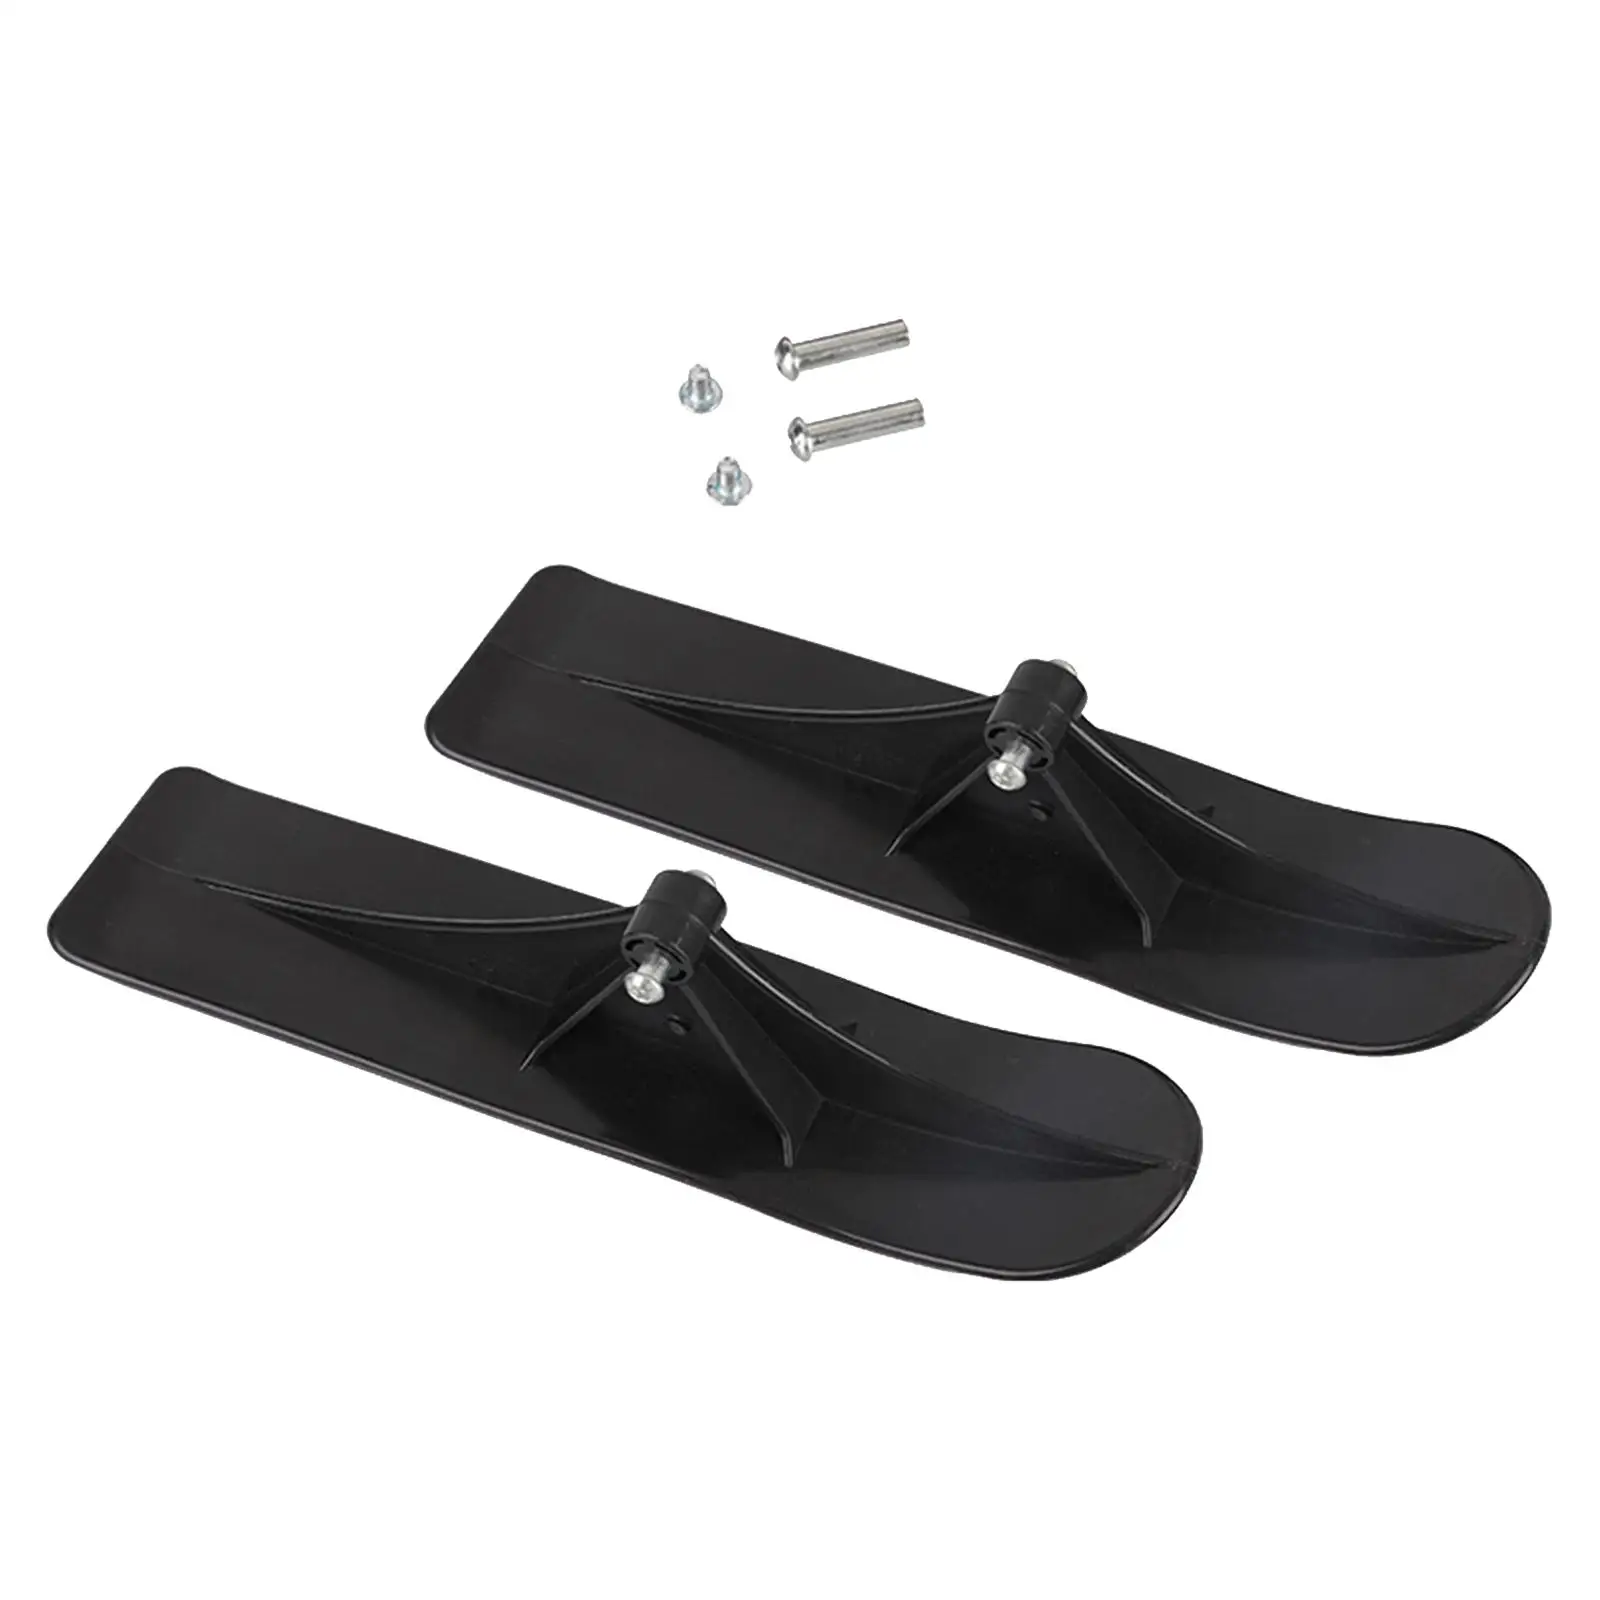 Snow Scooter Ski Sled Toboggan Refit Boots Multifunction with Screw Replacement Ski Board for Downhill Sleds Children Novices